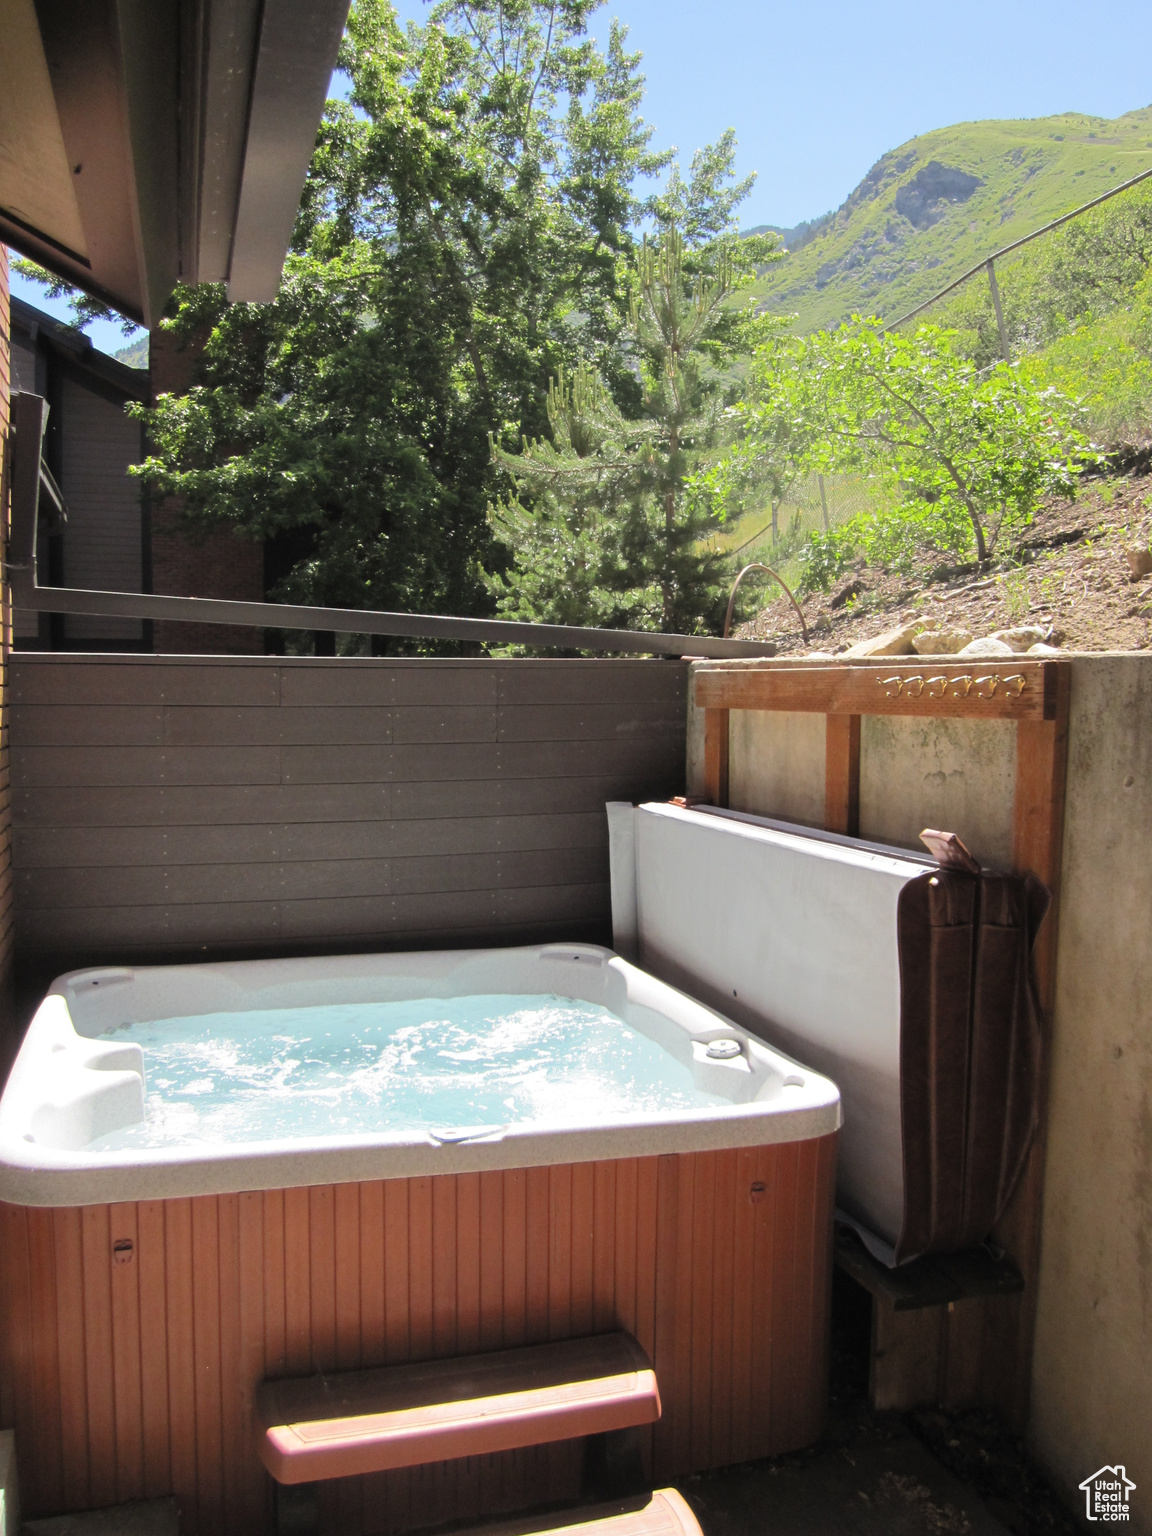 View of patio with a mountain view and a hot tub. Hot tub can be running and serviced for a $200 additional monthly fee.